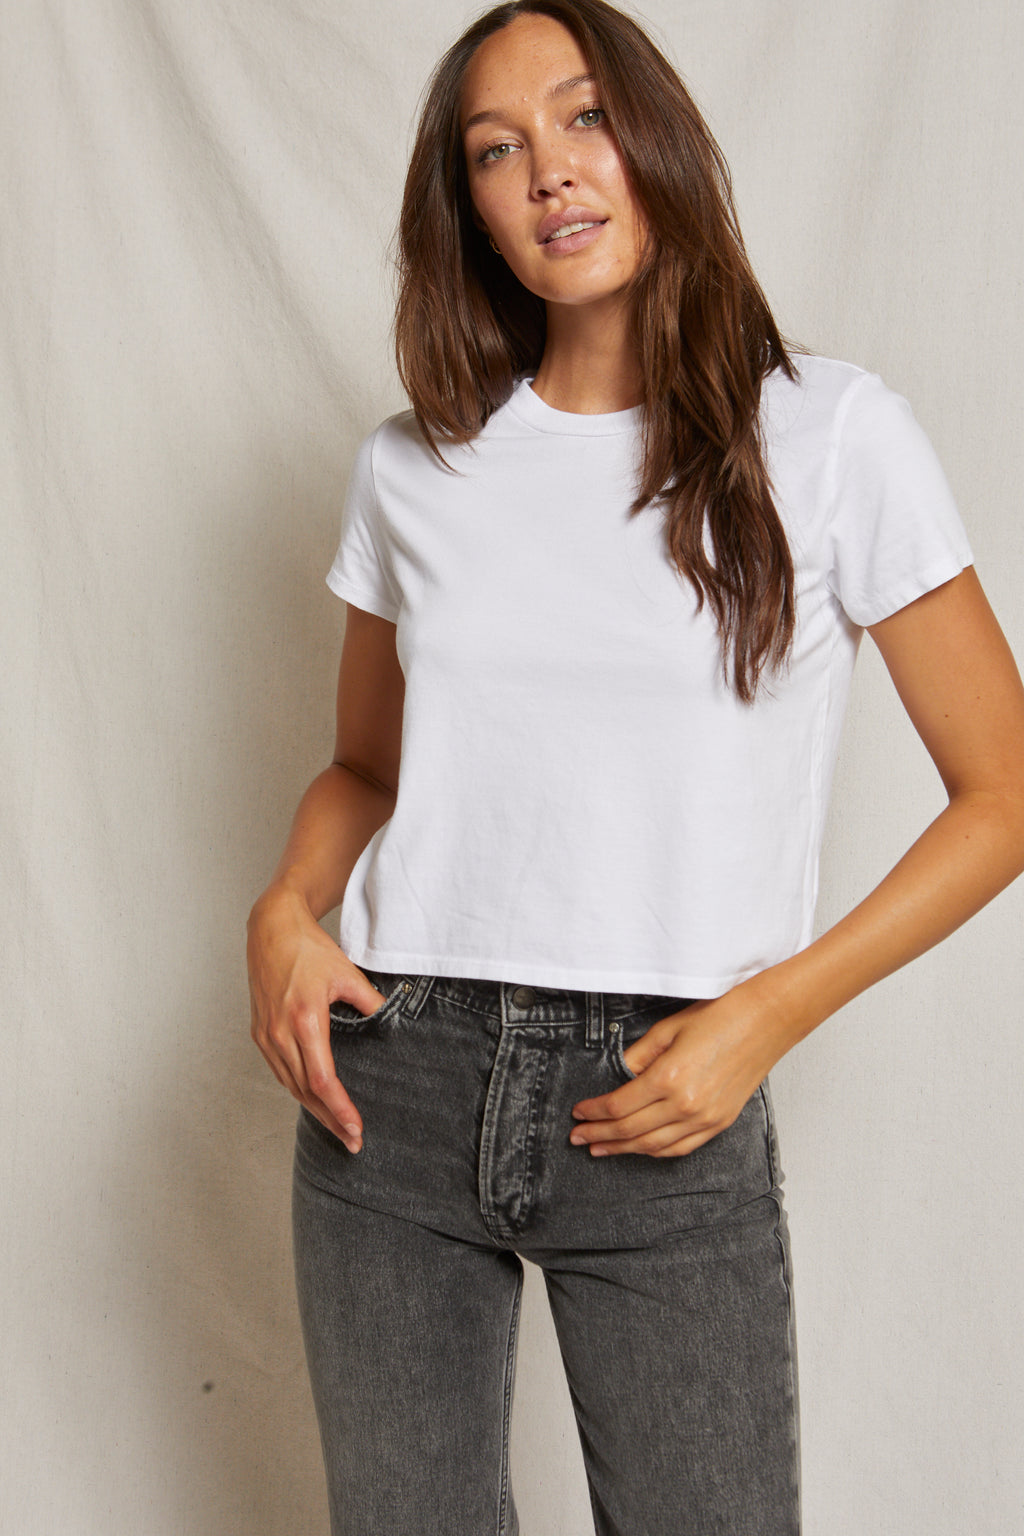 perfectwhitetee Springsteen Tee in White